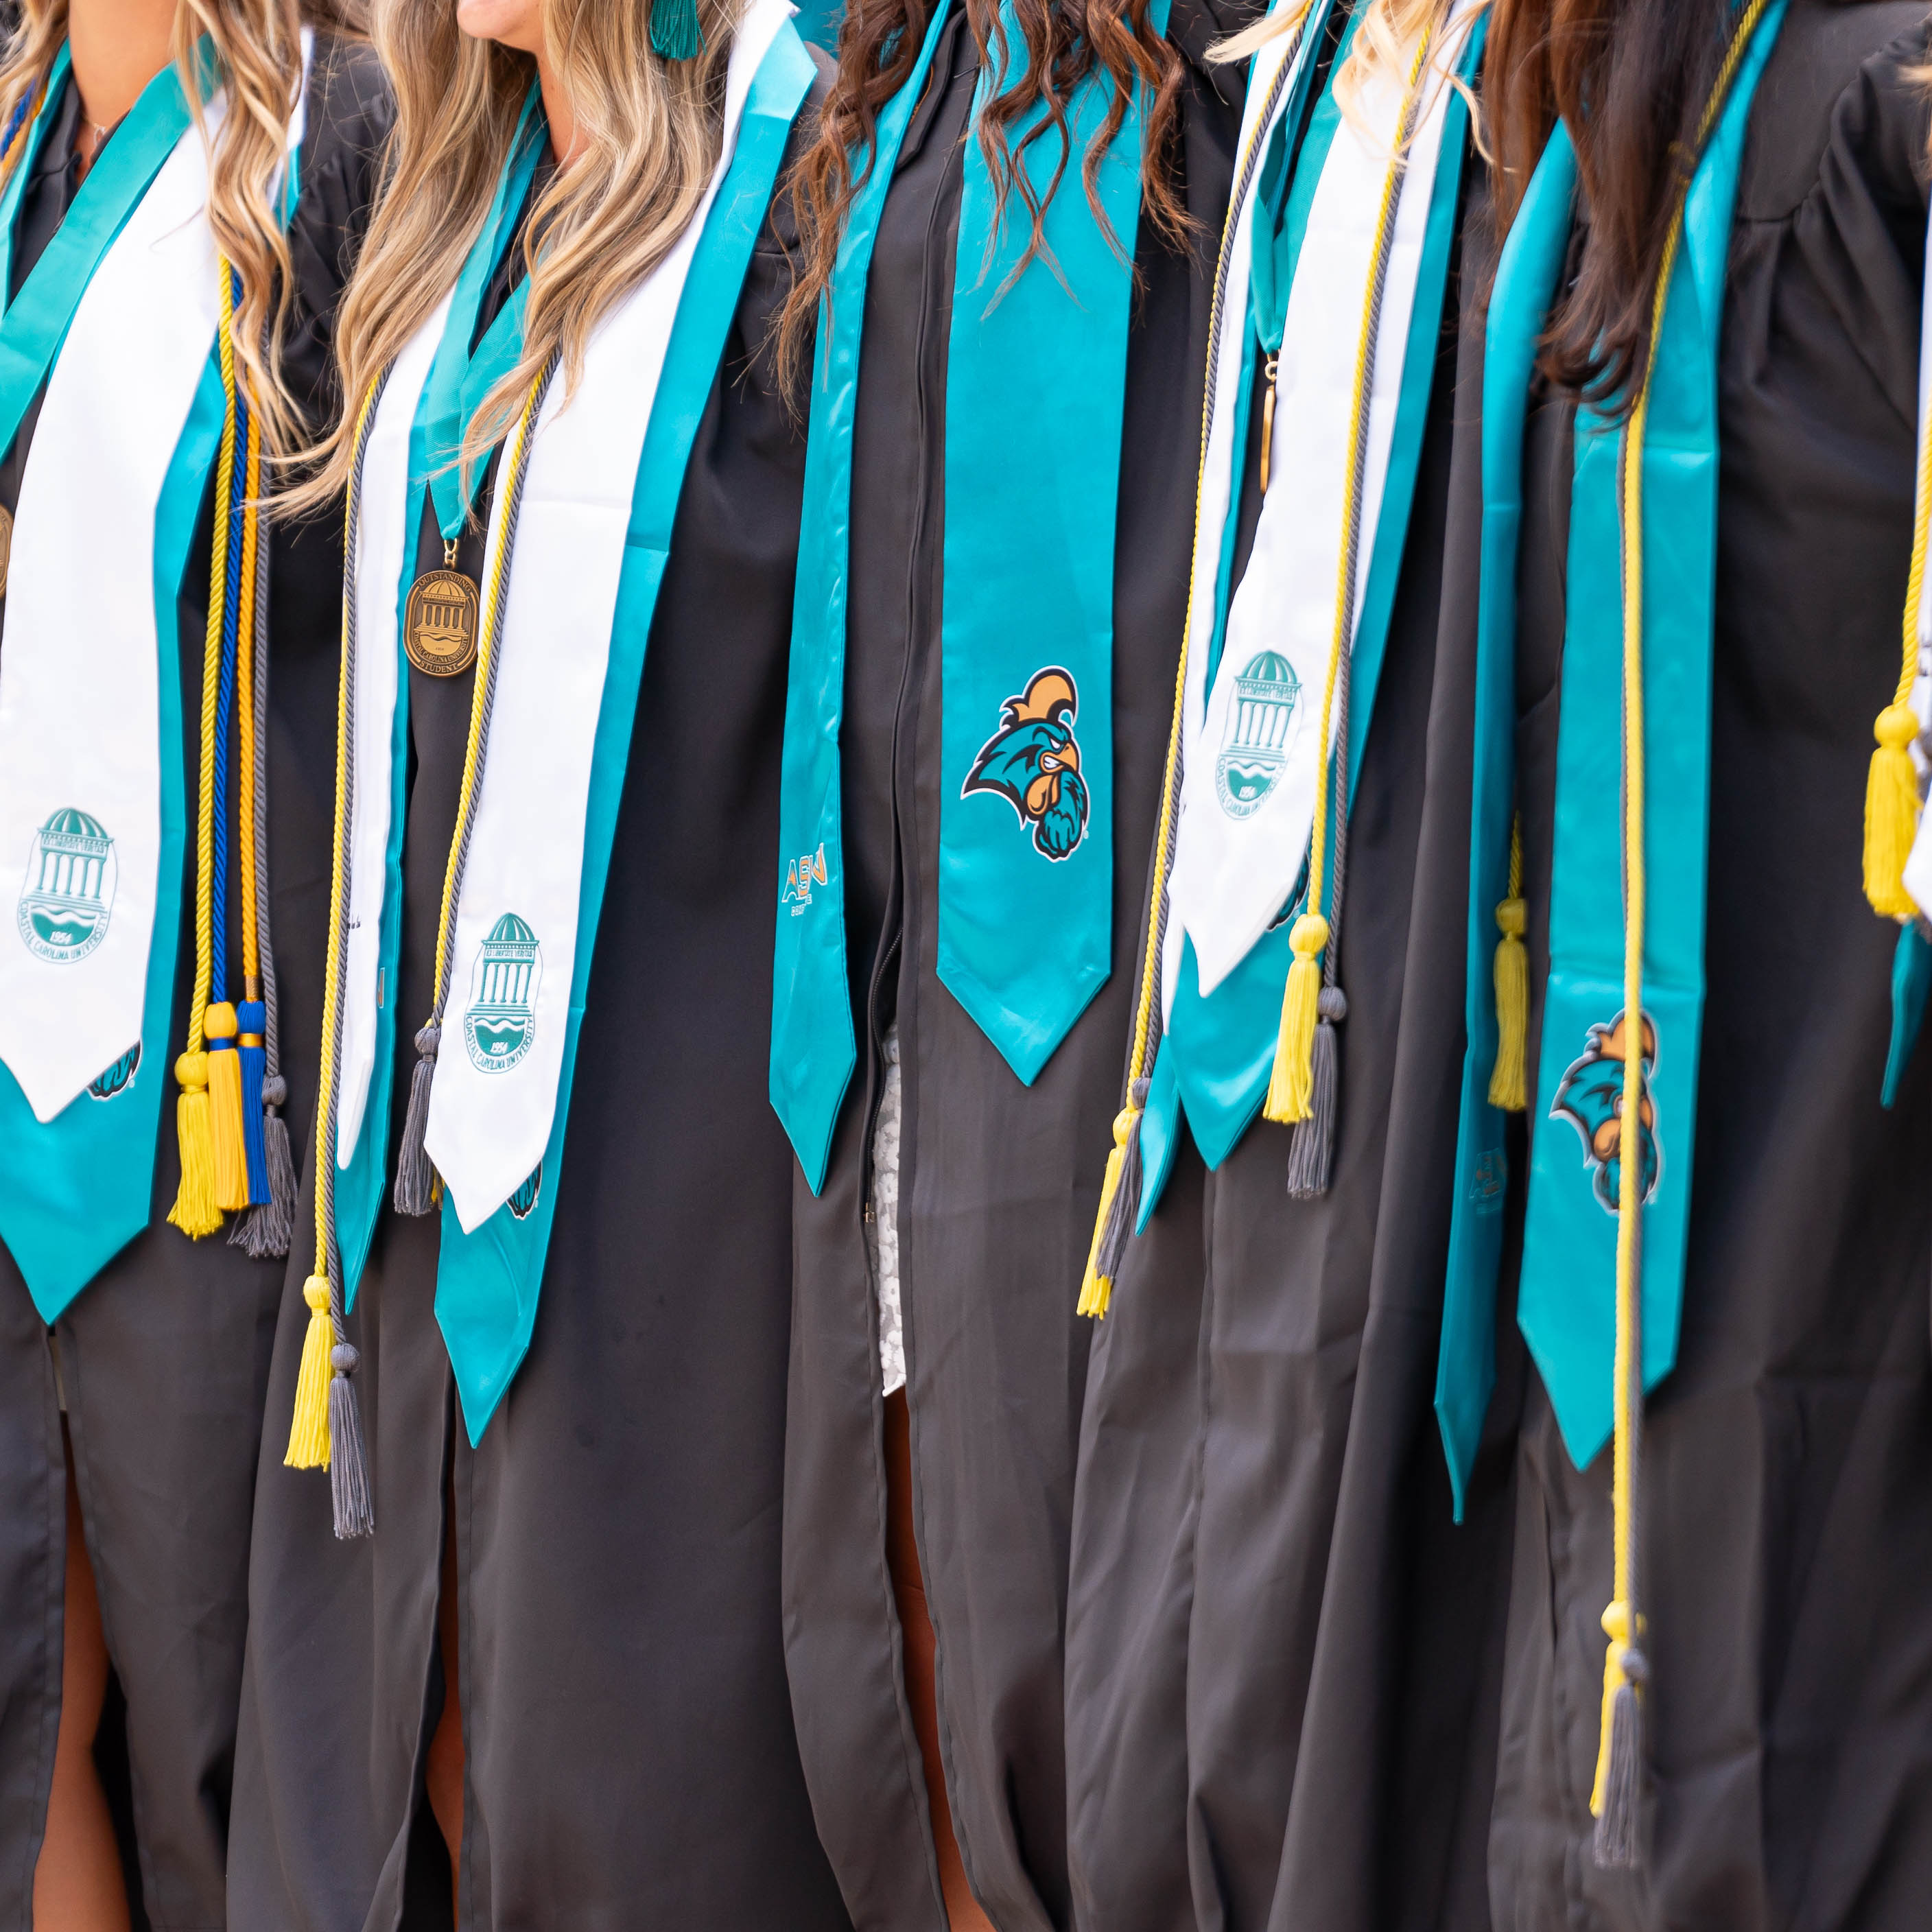 Students in a line dressed in regalia